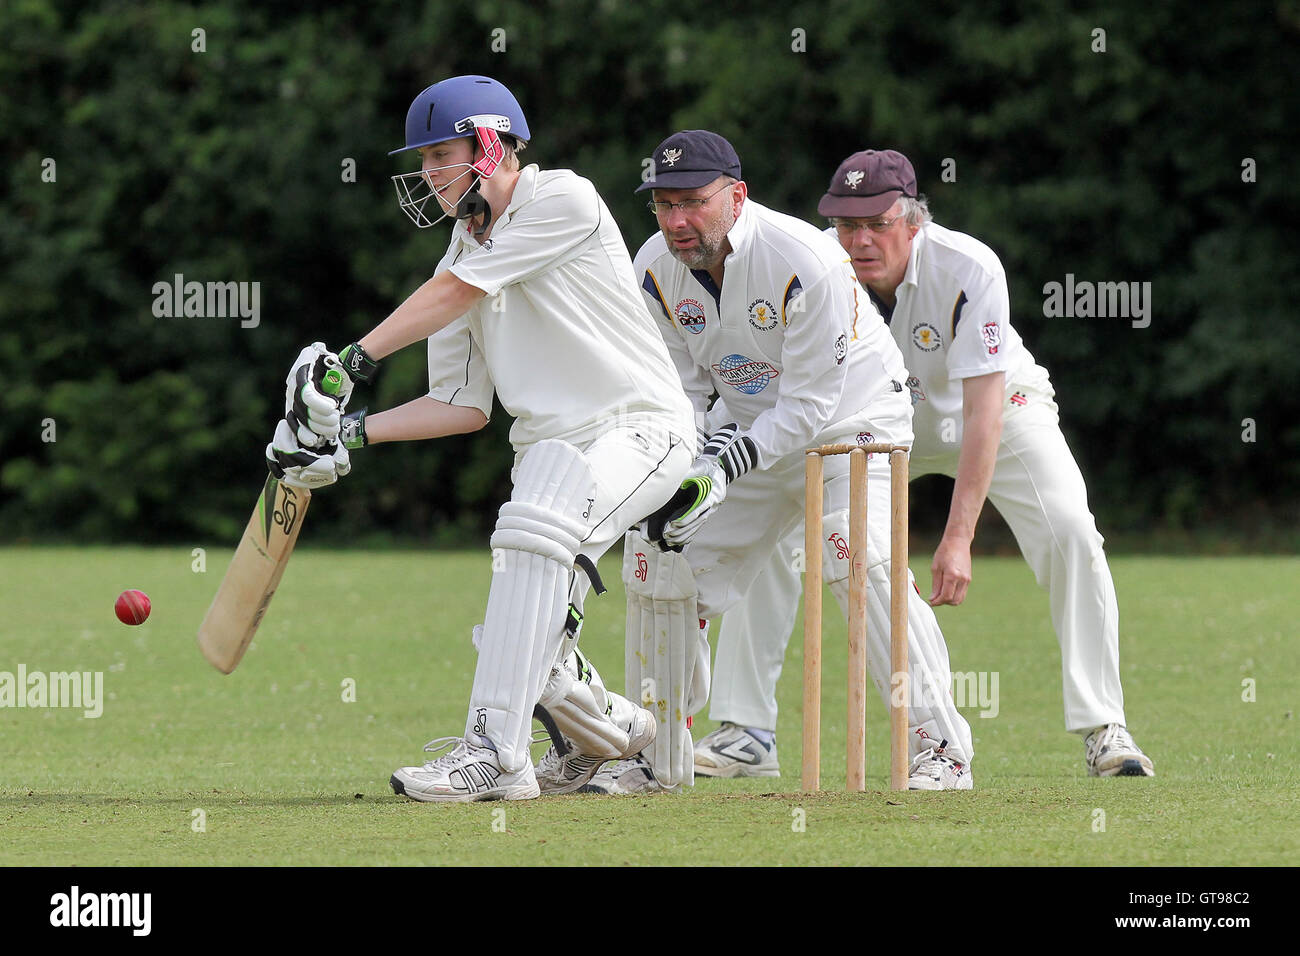 Navestock Ardleigh Green CC 2nd XI vs Galleywood CC 2nd XI - Essex Cricket League at Fyfield CC - 25/06/11 Stock Photo